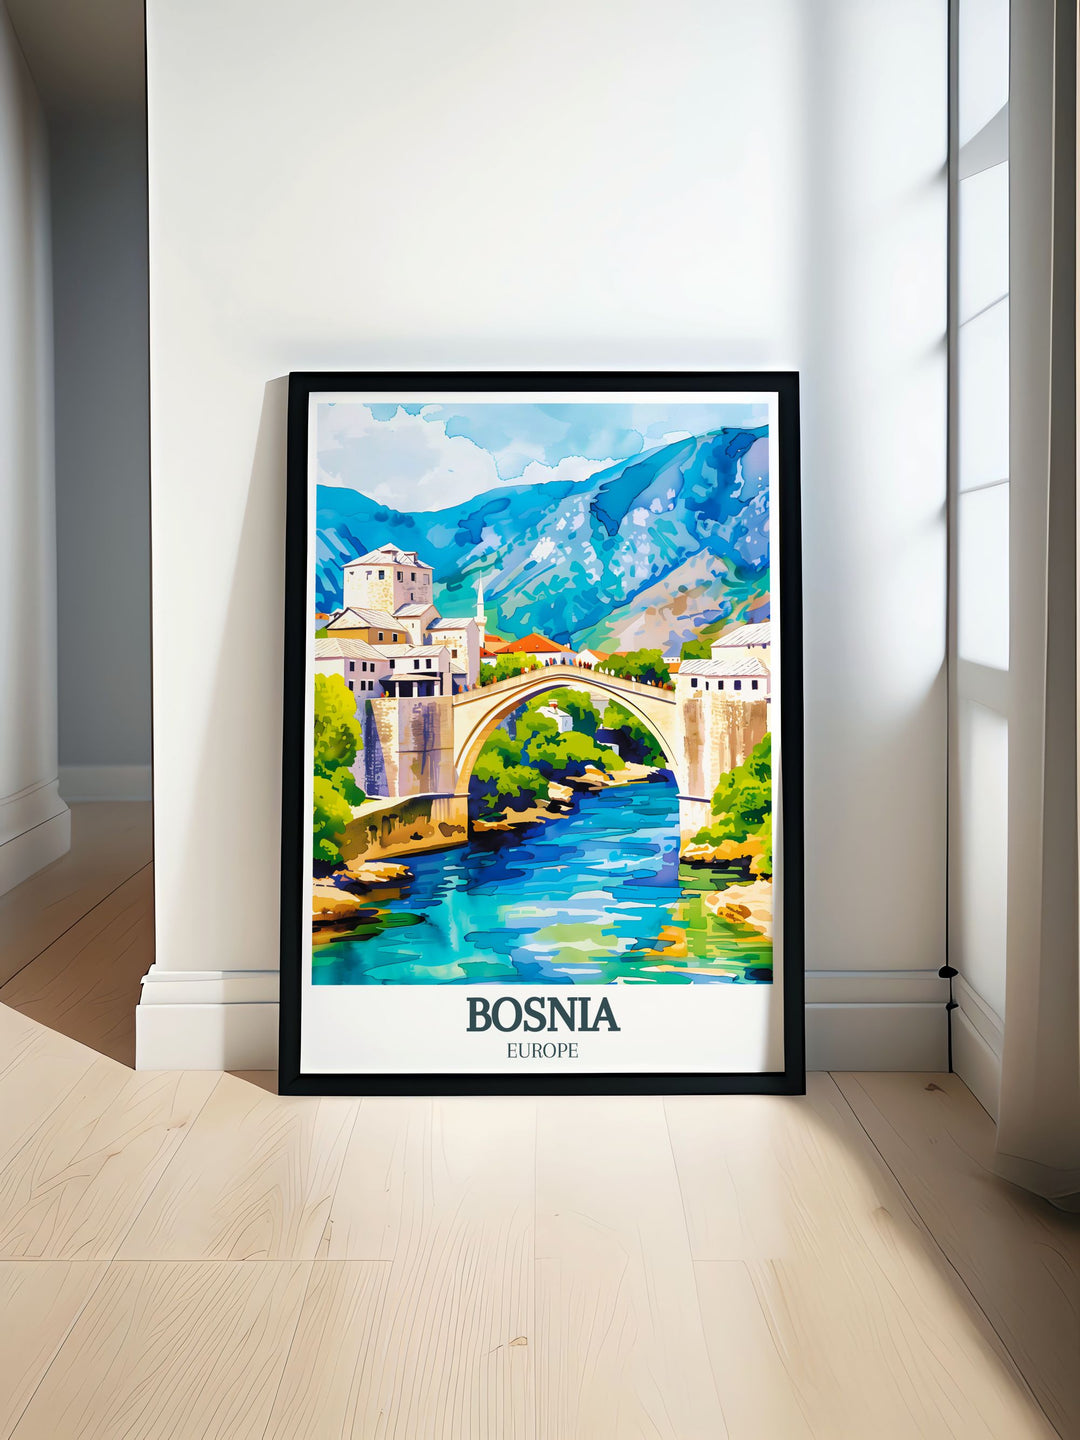 Mostar, Stari Most bridge captured in a beautiful Bosnia Poster. This Bosnia Wall Art showcases the historic beauty of Mostar with its iconic Stari Most bridge. Perfect for home decor or as a meaningful gift for travel and history enthusiasts.